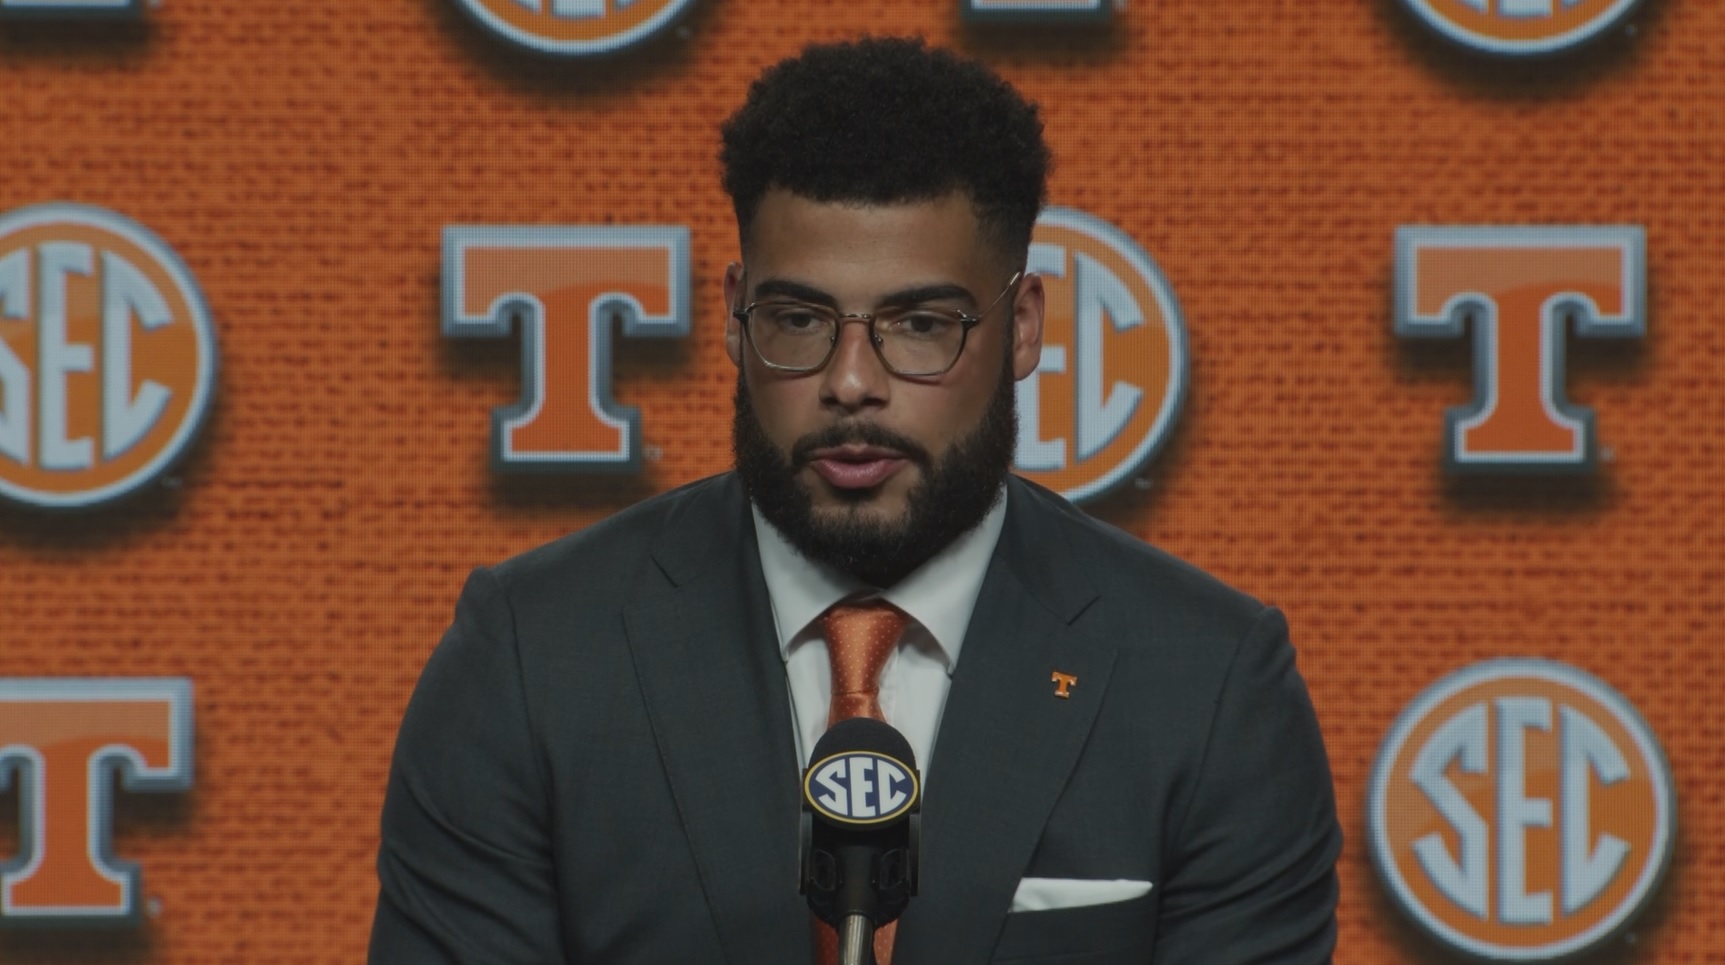 WATCH: Jacob Warren – Tennessee TE – Electronic Media Room at #SECMD23